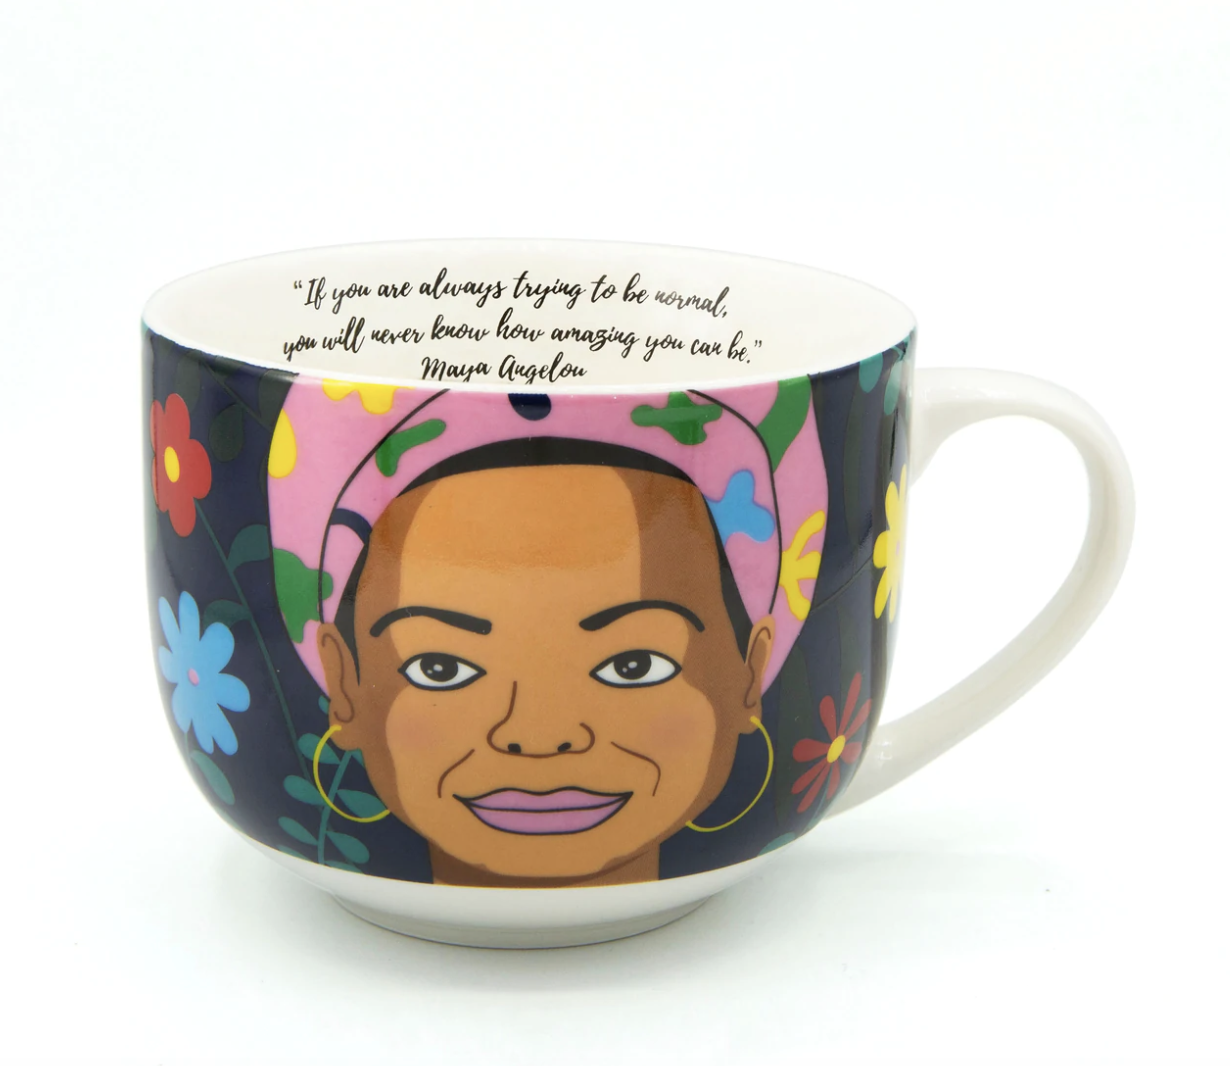 Maya Angelou &quot;If You Are Always Trying To Be Normal, You Will Never Know How Amazing You Can Be&quot; Mug 